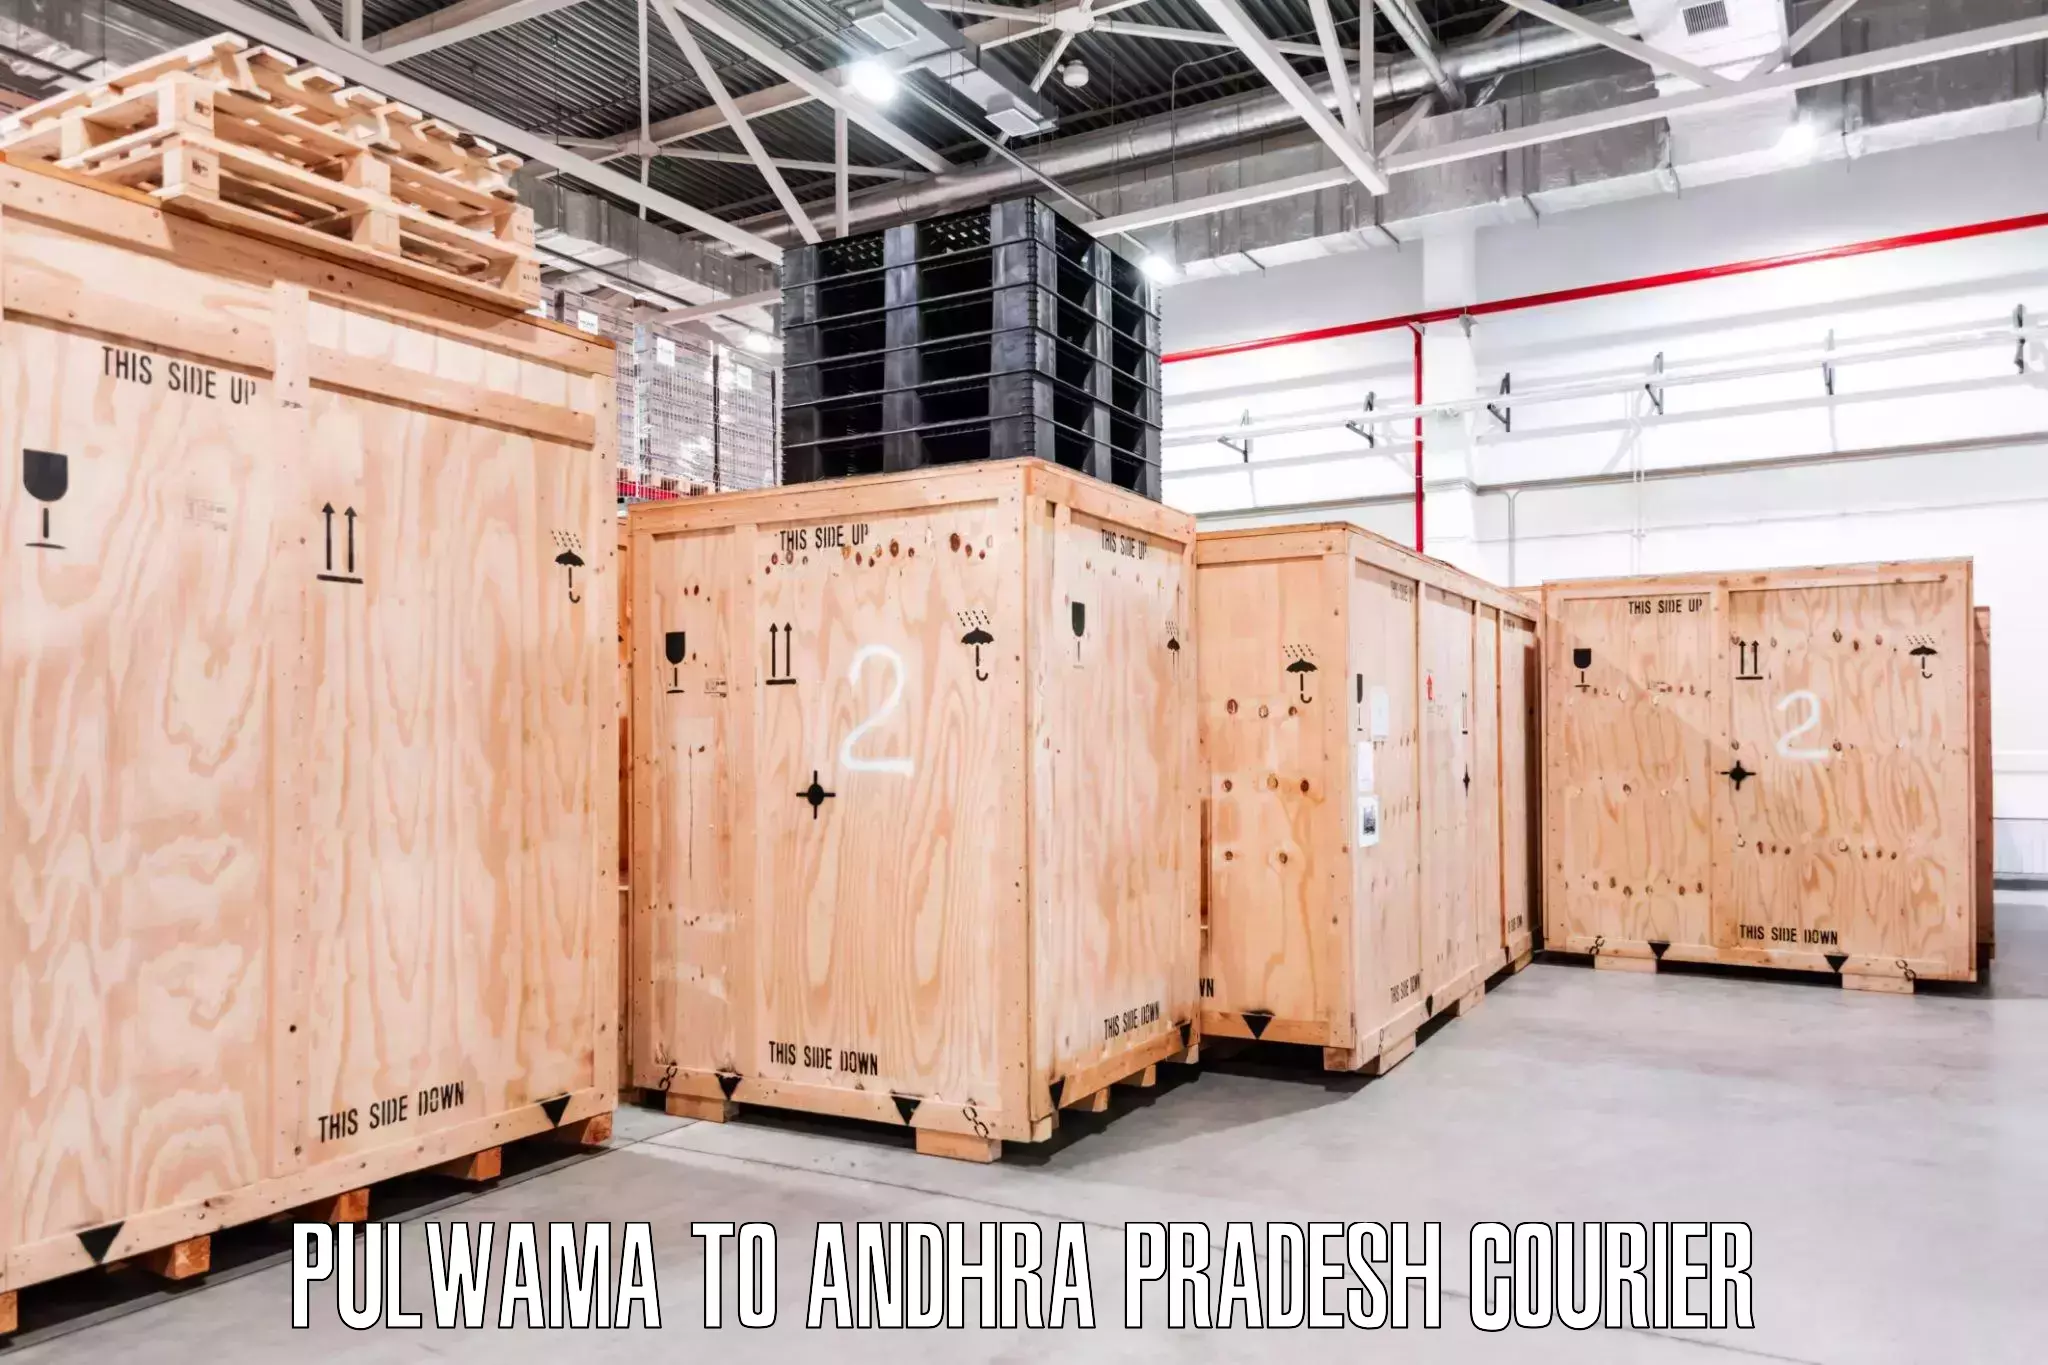 Furniture relocation experts Pulwama to Chodavaram